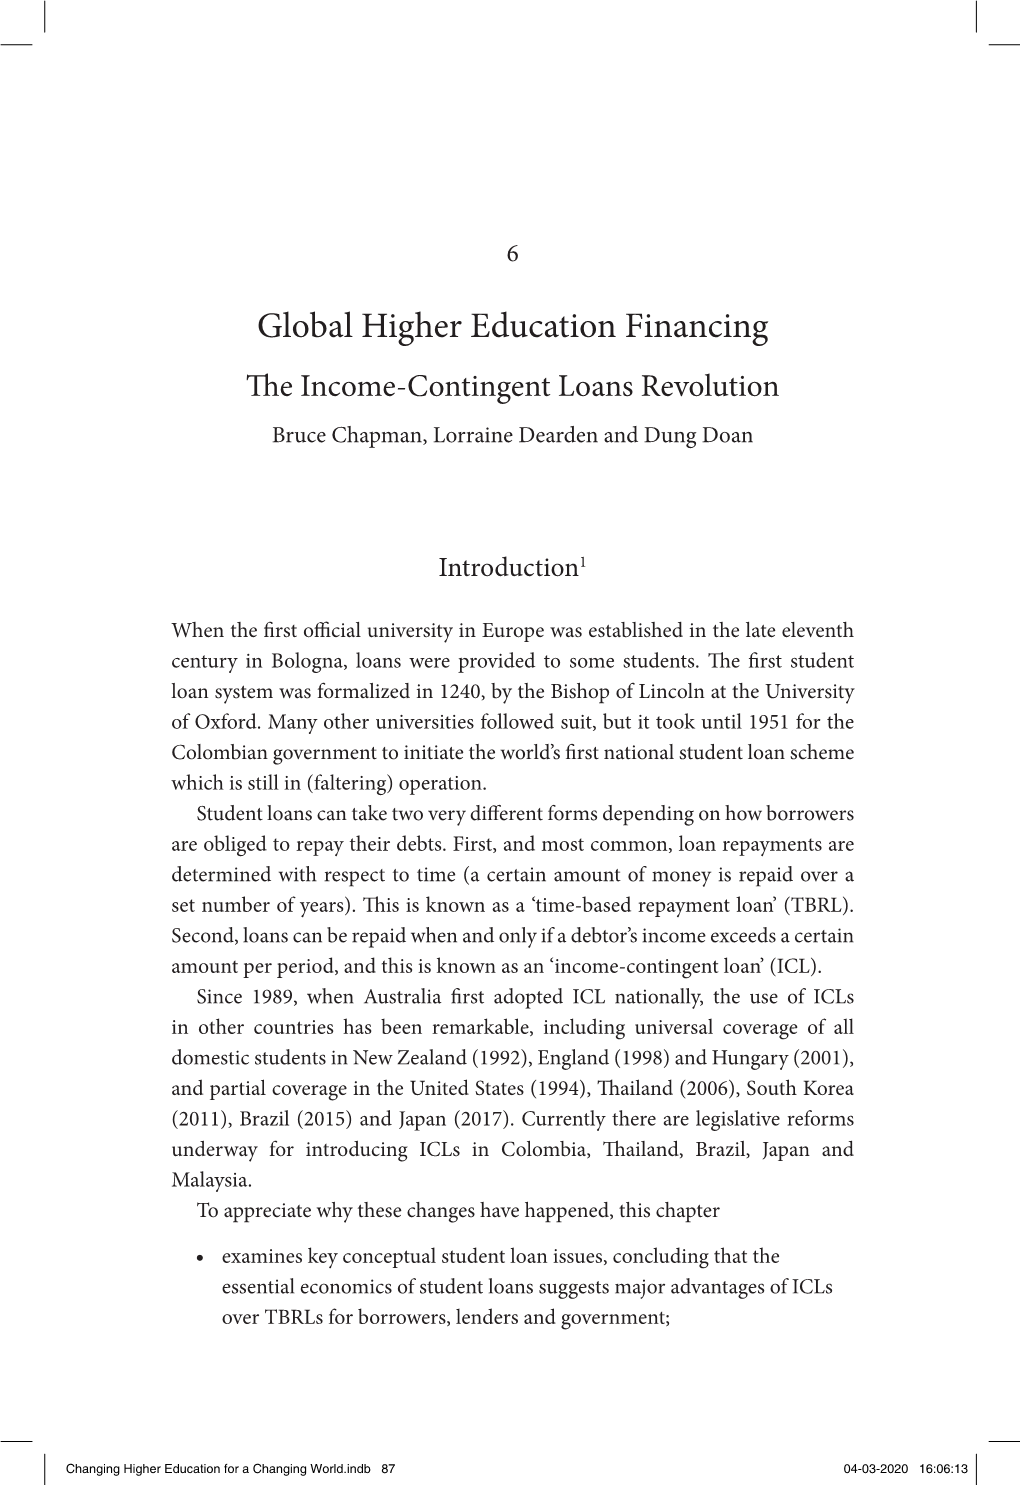 Global Higher Education Financing the Income-Contingent Loans Revolution Bruce Chapman, Lorraine Dearden and Dung Doan